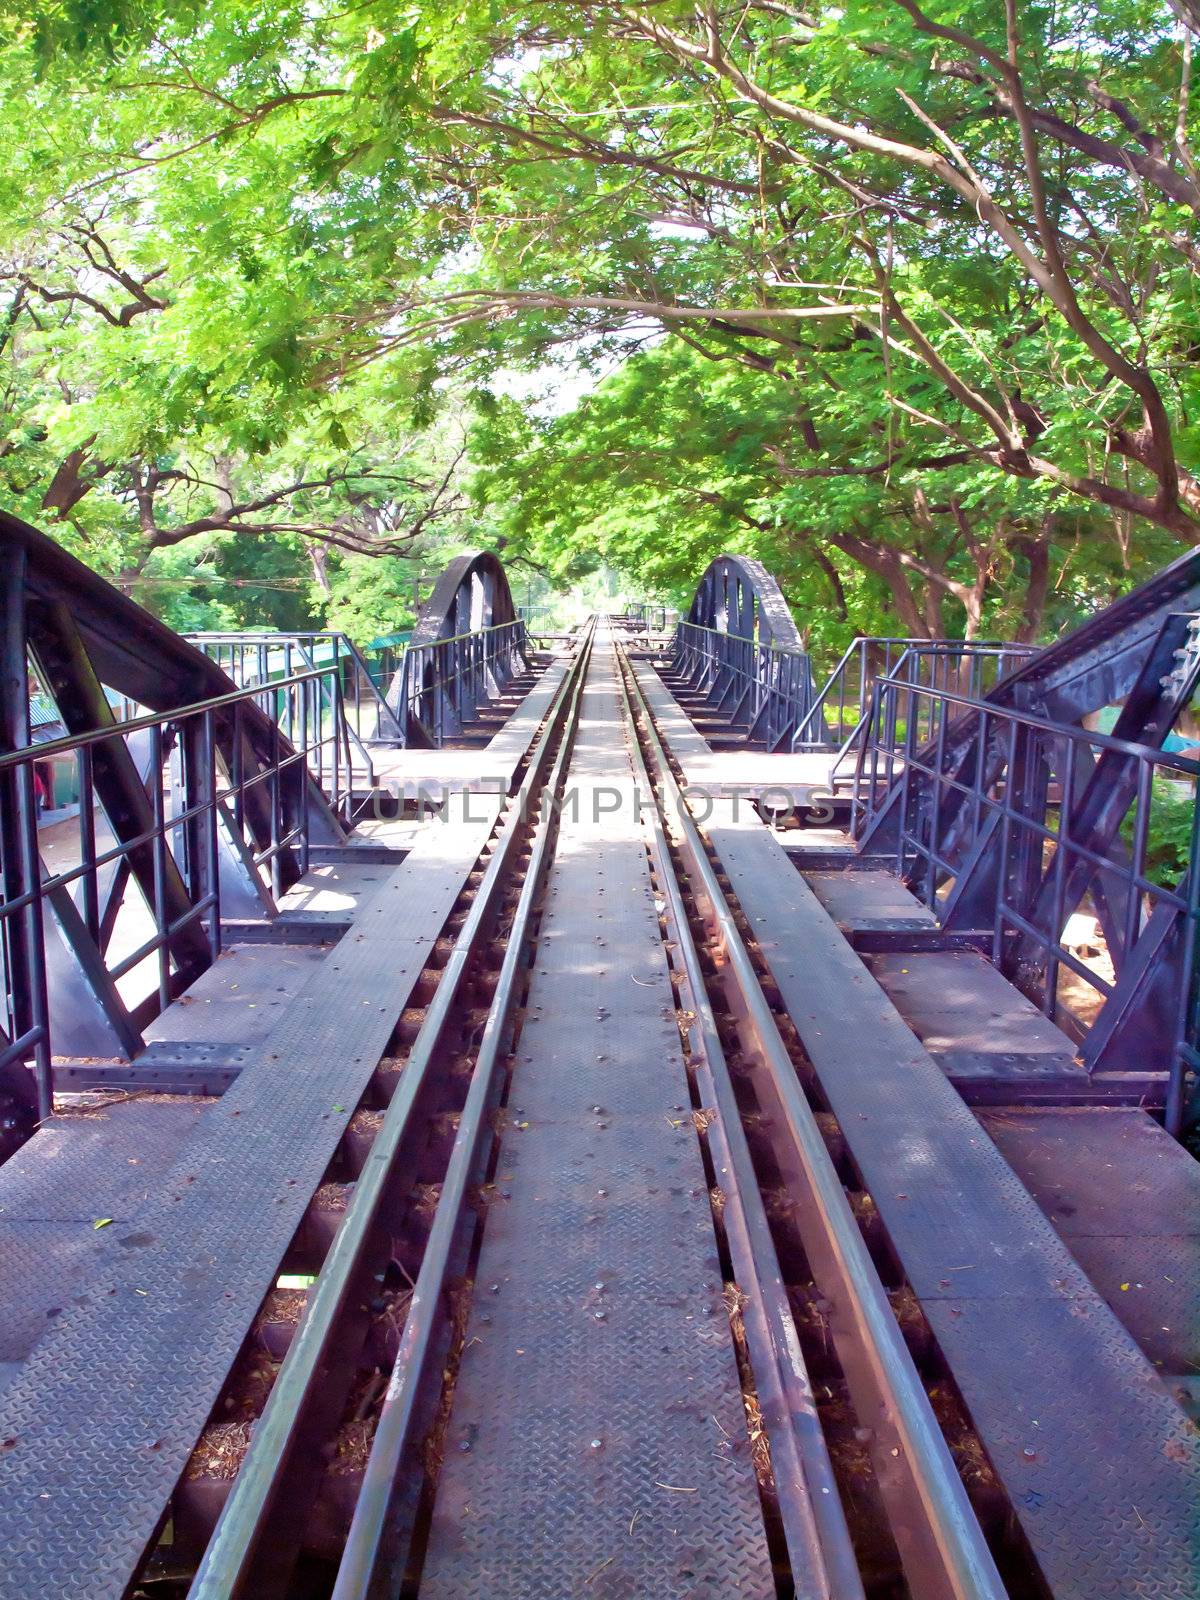 The bridge of the river kwai by Exsodus